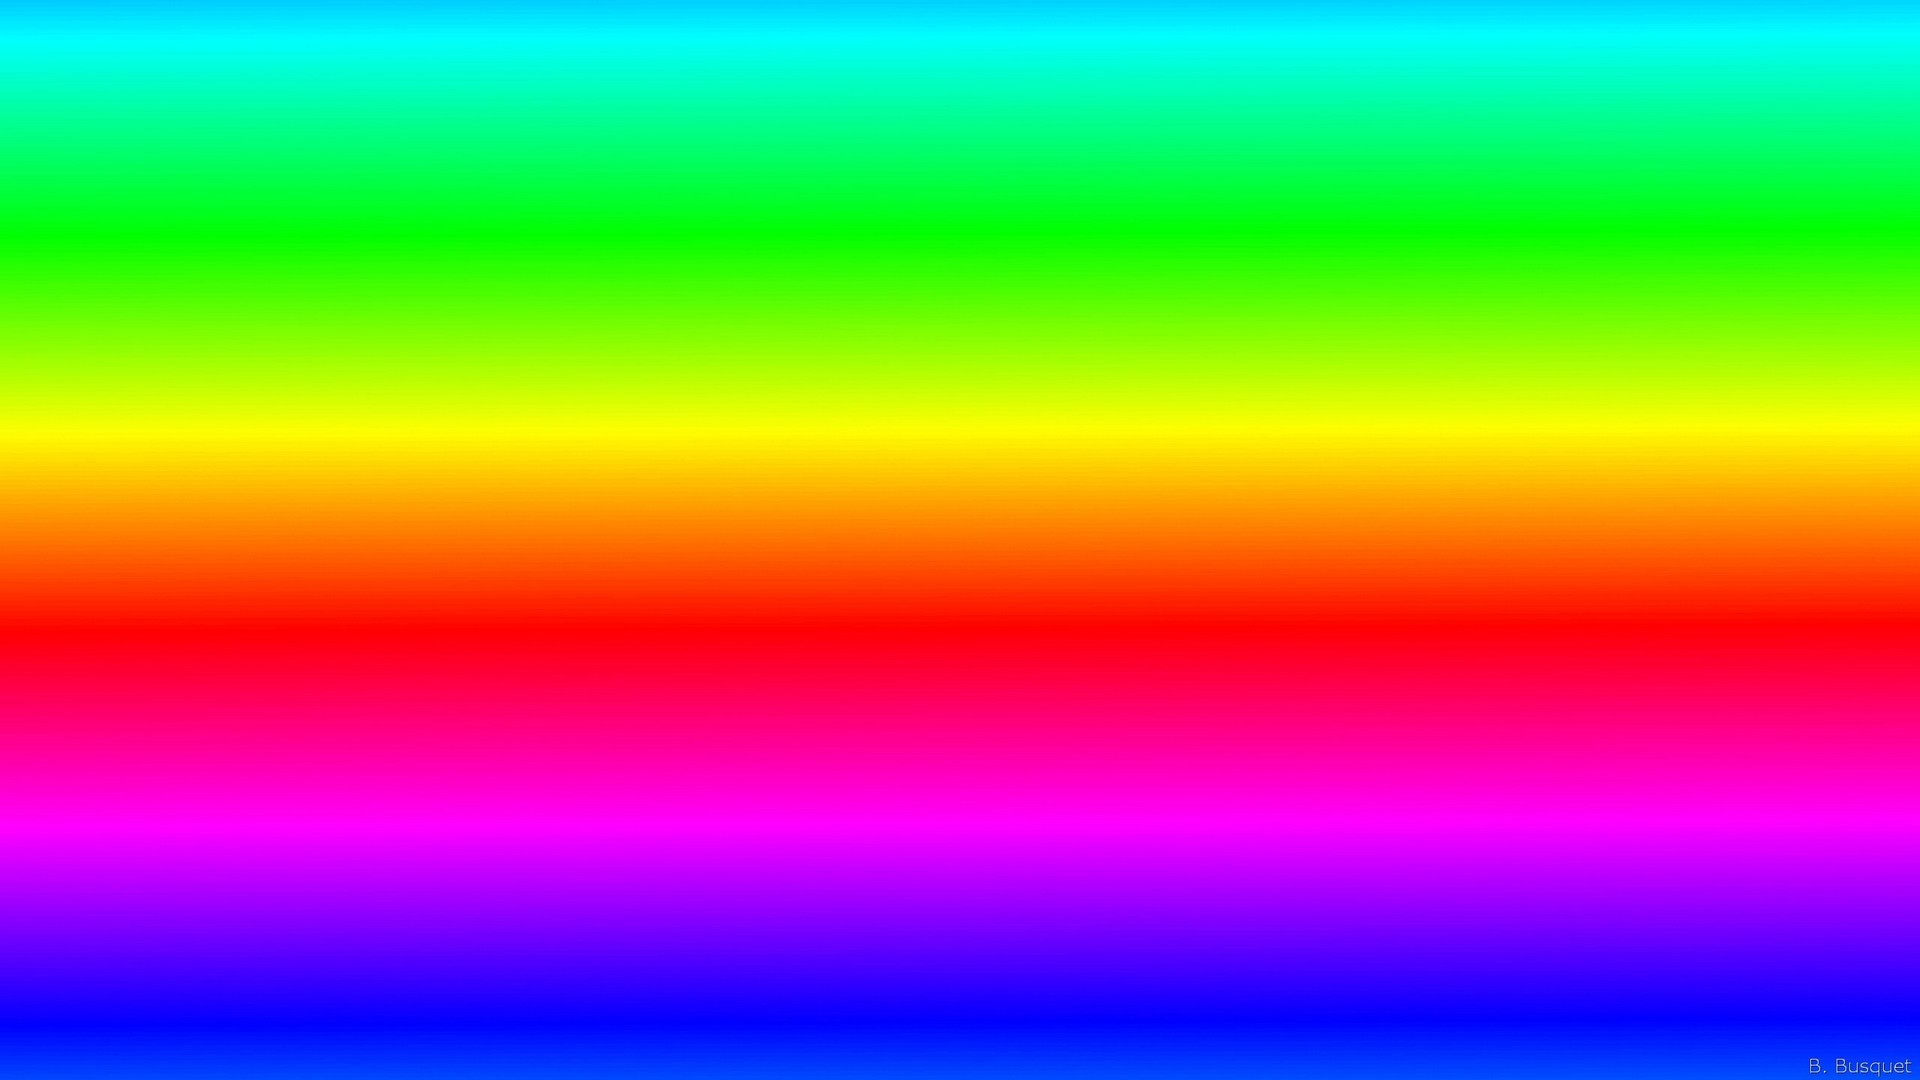 Wallpapers Computer Rainbow With Resolution 1920X1080 pixel. You can make this wallpaper for your Desktop Computer Backgrounds, Mac Wallpapers, Android Lock screen or iPhone Screensavers